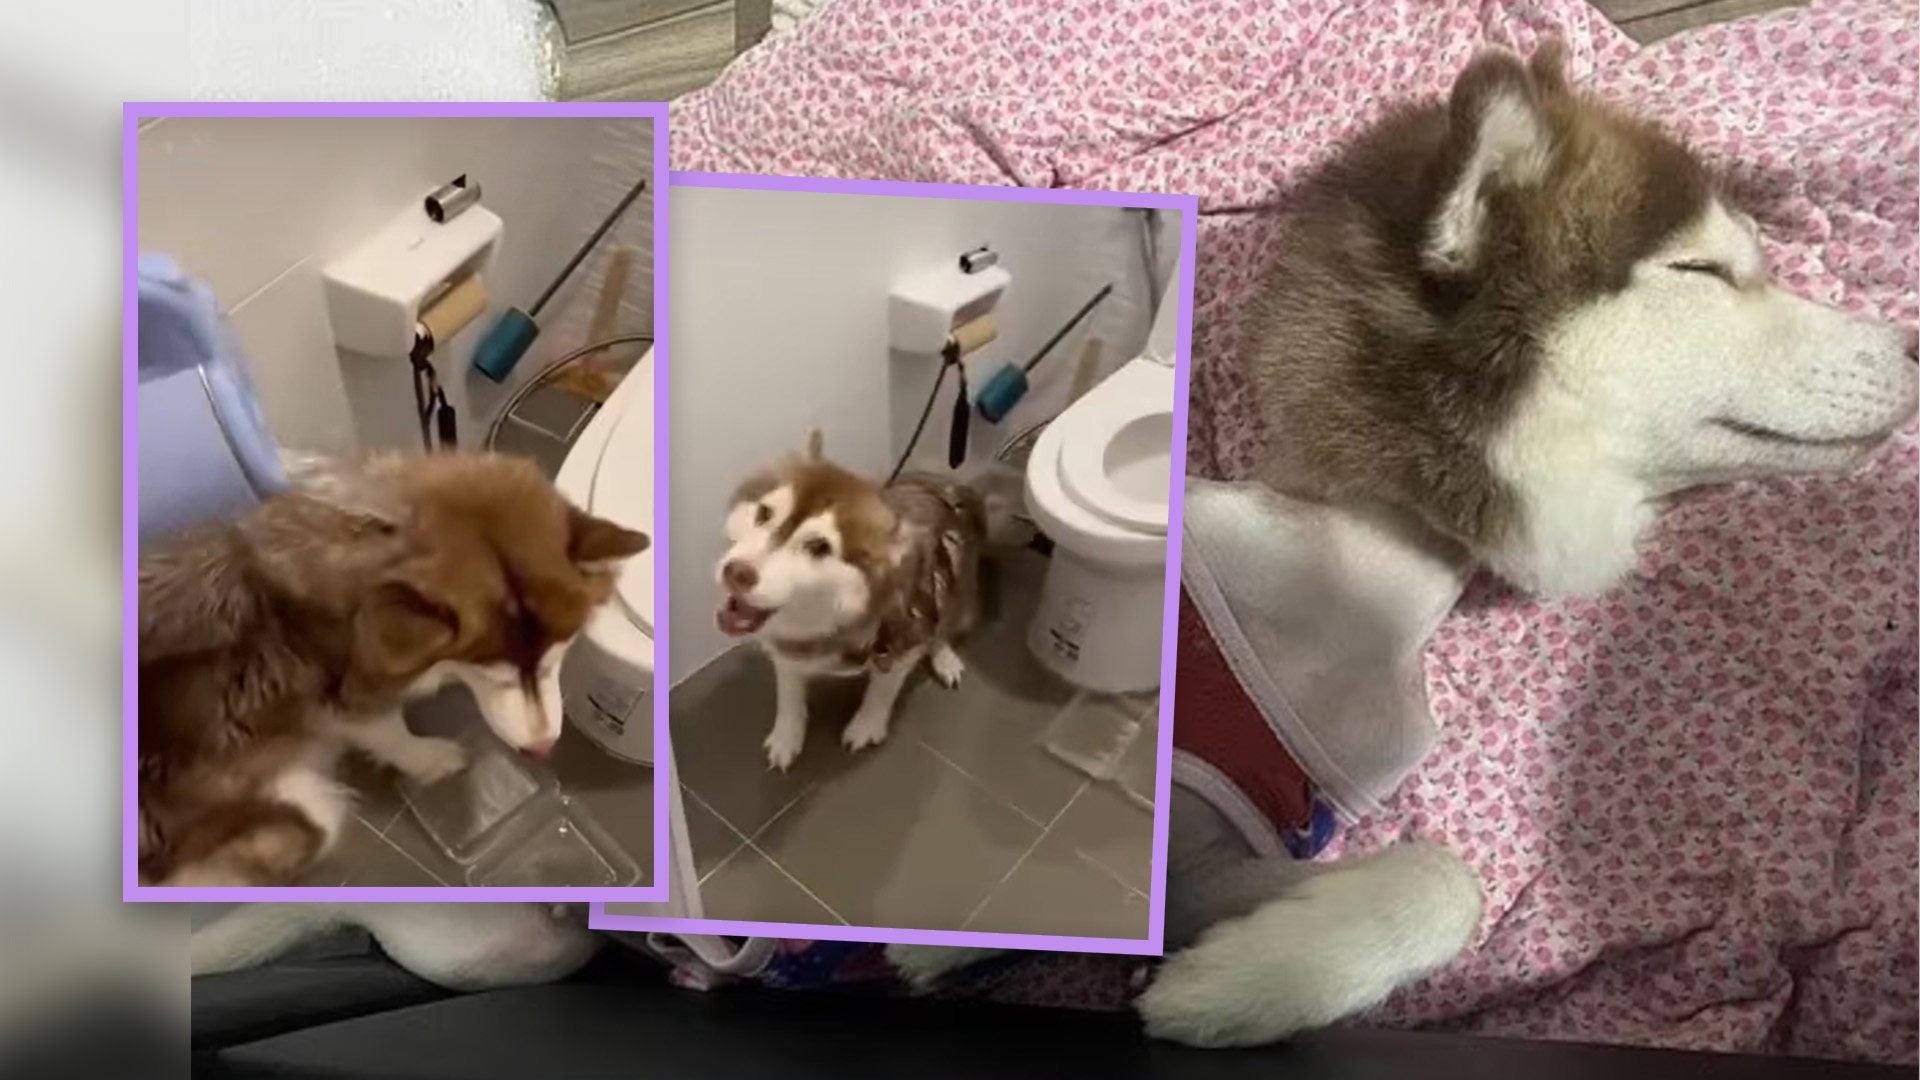 Video footage of a woman in Thailand pouring searing hot water over her pregnant pet Husky as punishment for “stealing a snack” has sparked public outrage and an investigation into her behaviour. Photo: SCMP composite/Facebook